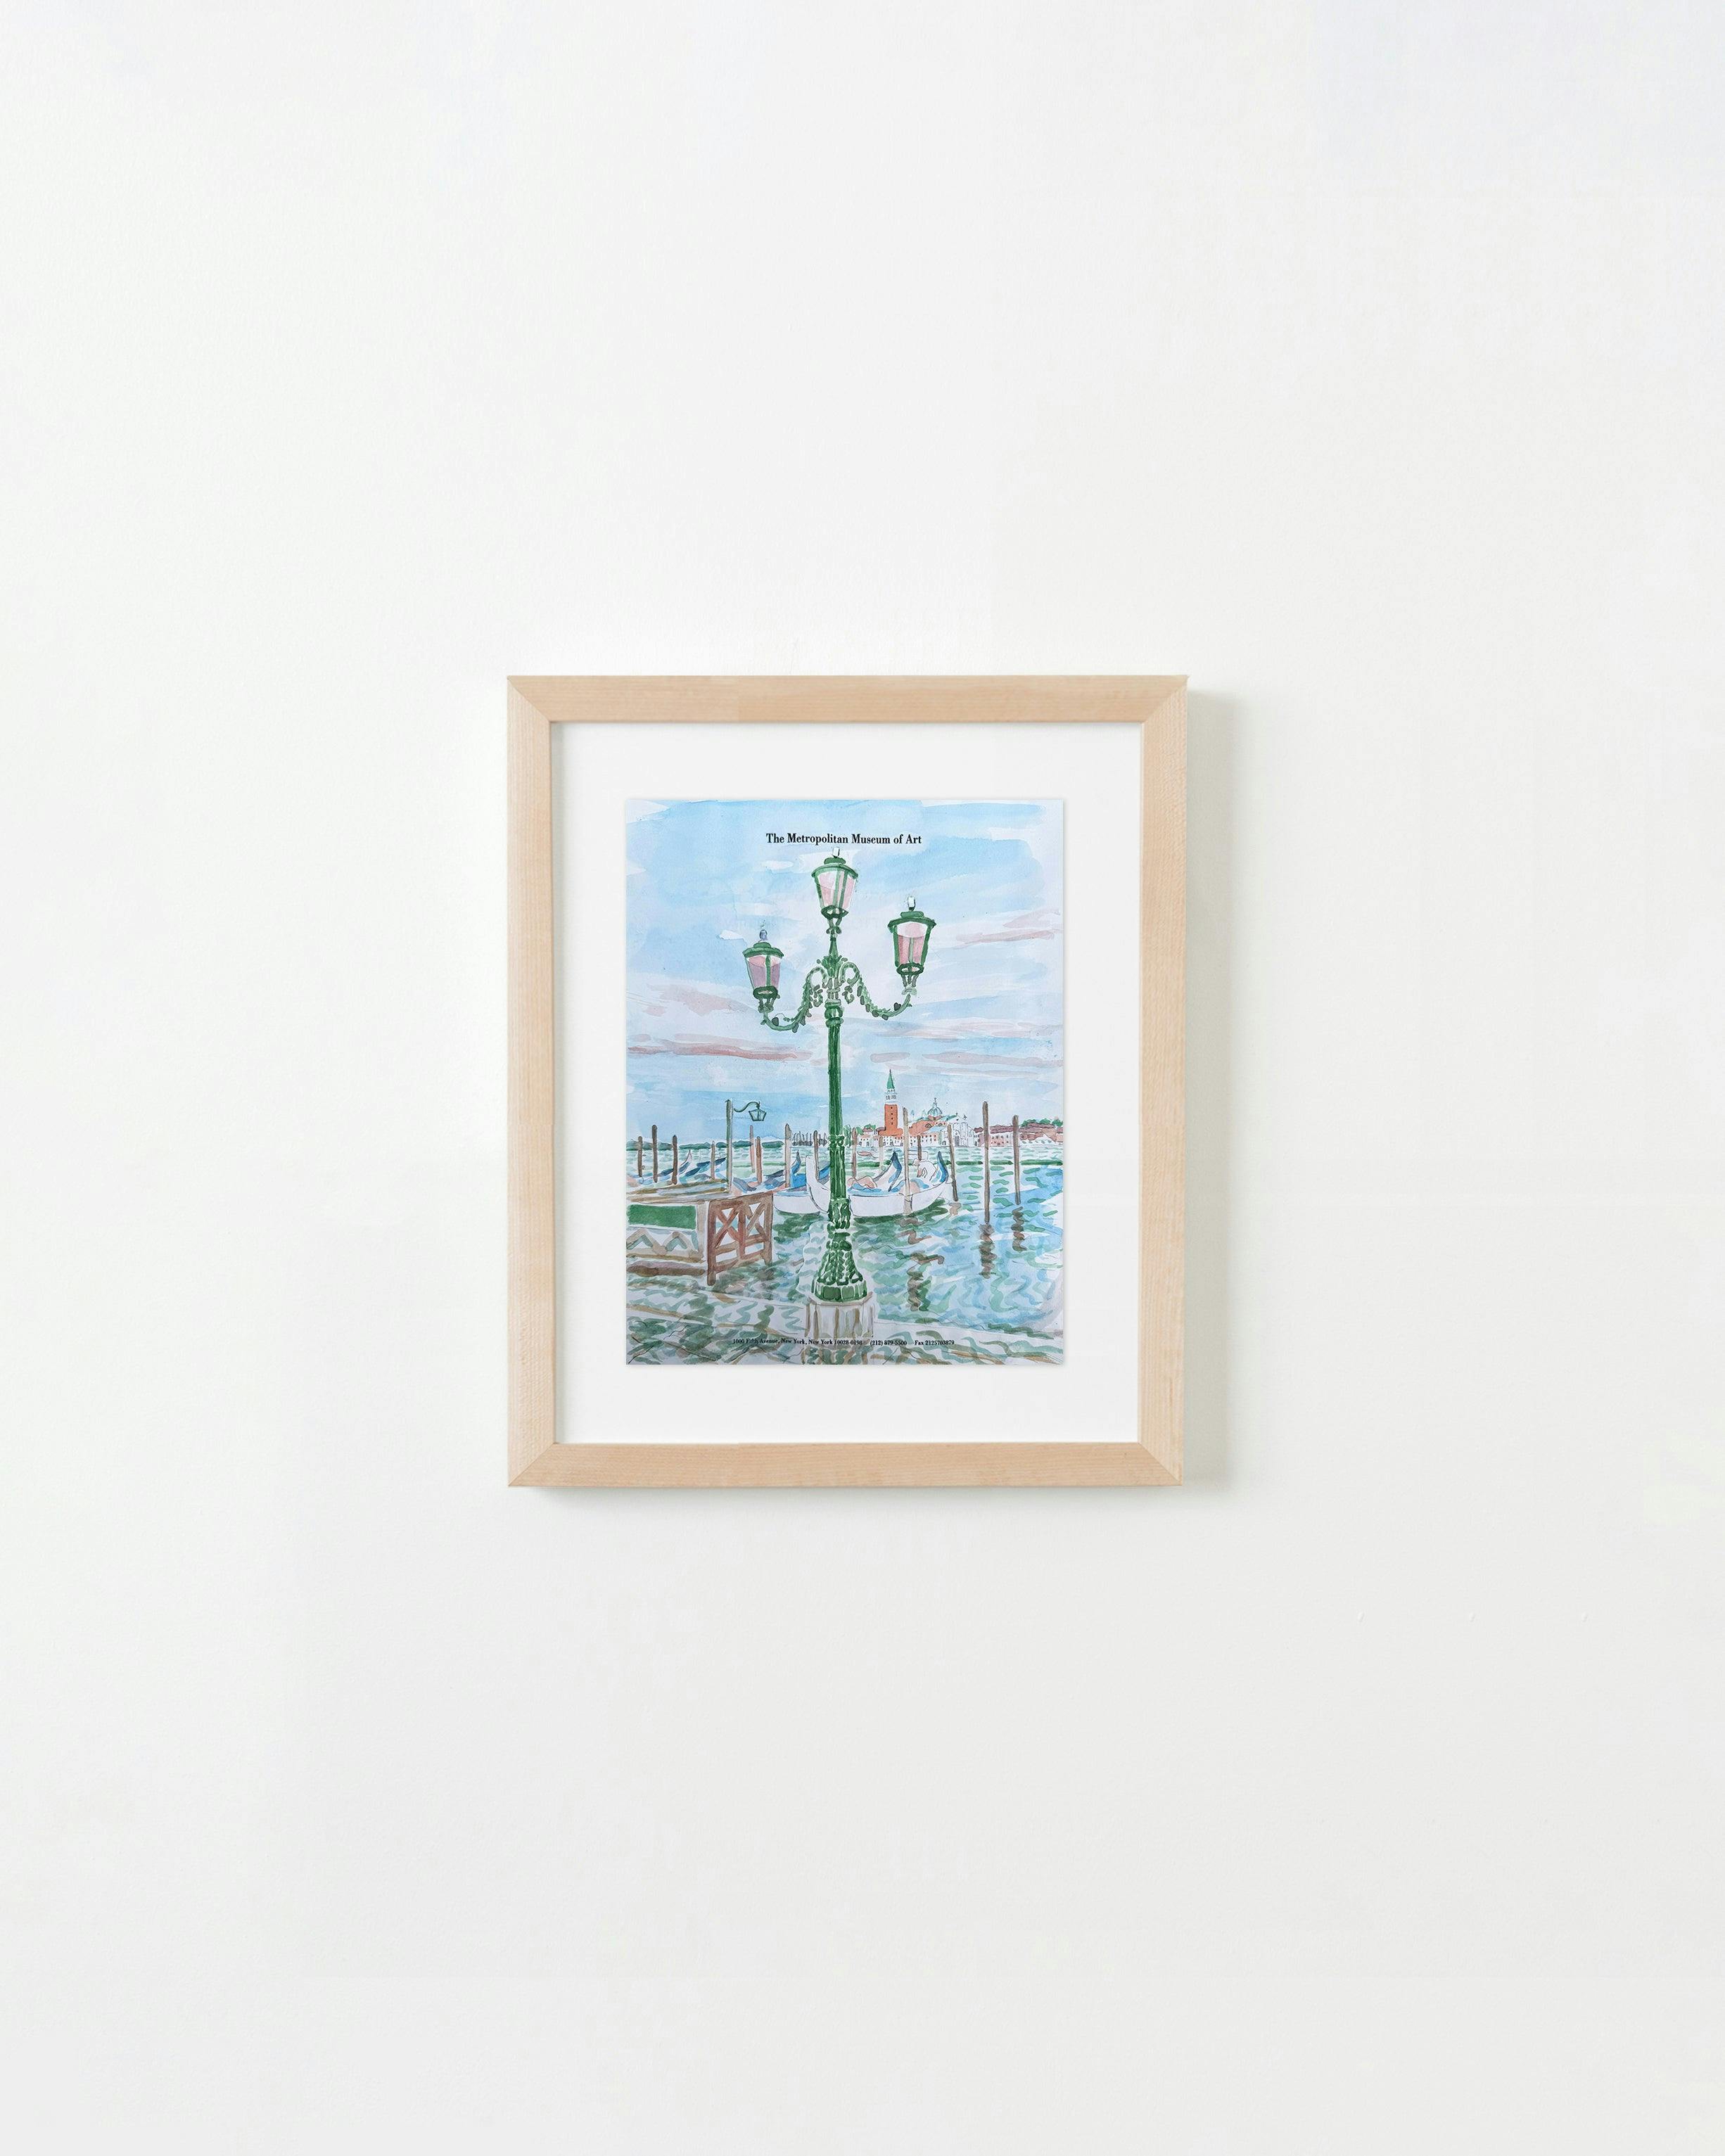 Painting by David Rhoads titled "Venice Lamppost with View of the Lagoon".